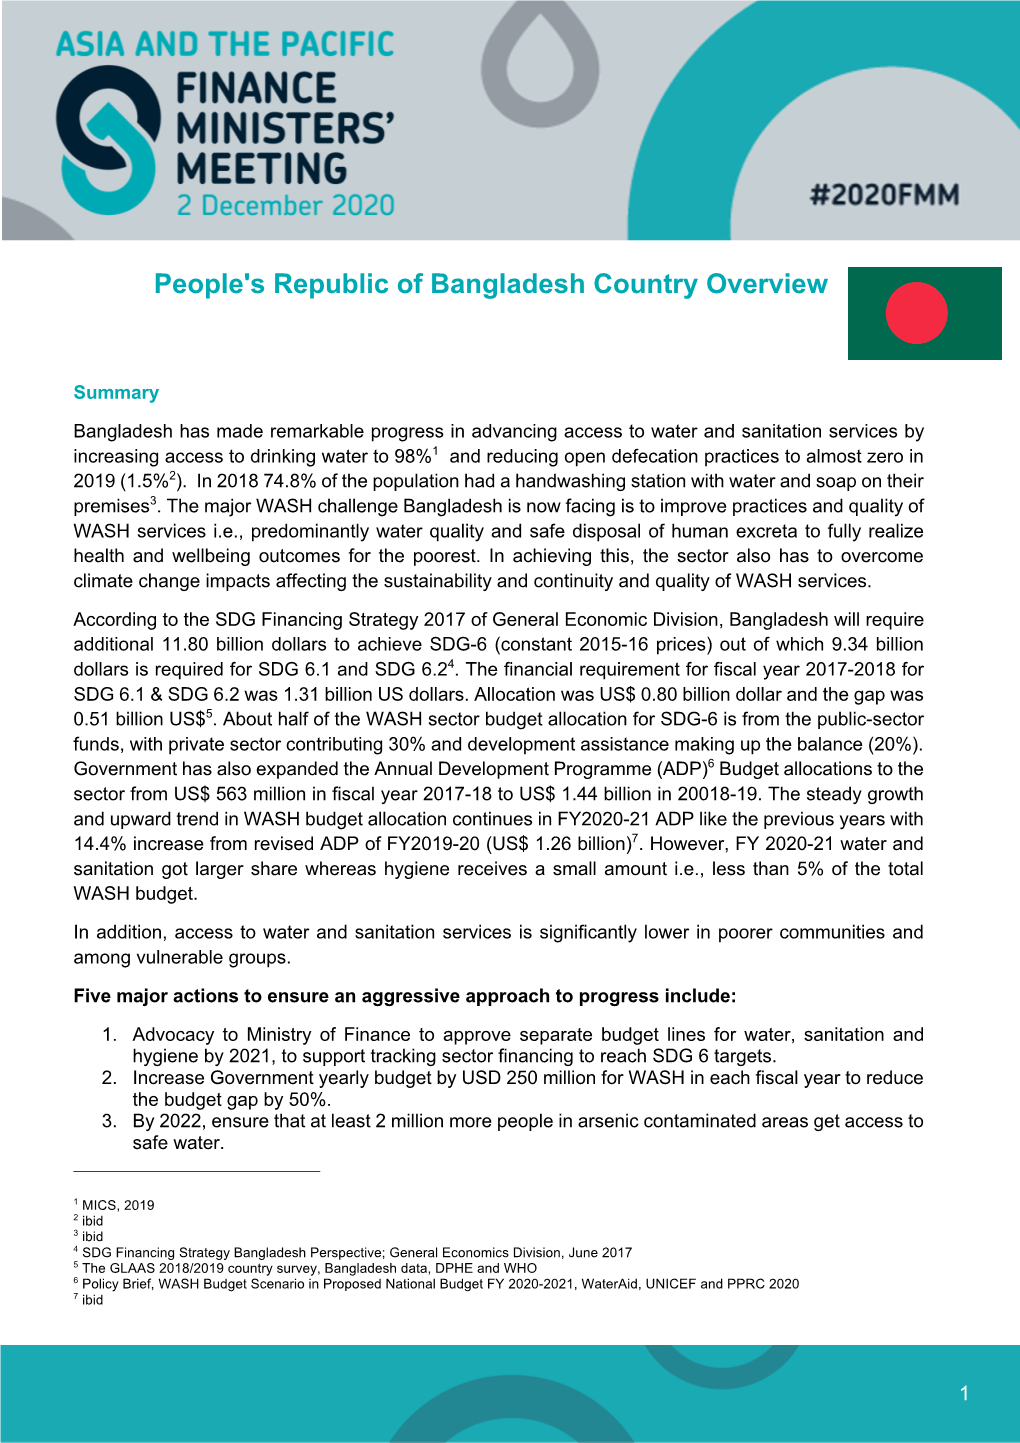 People's Republic of Bangladesh Country Overview